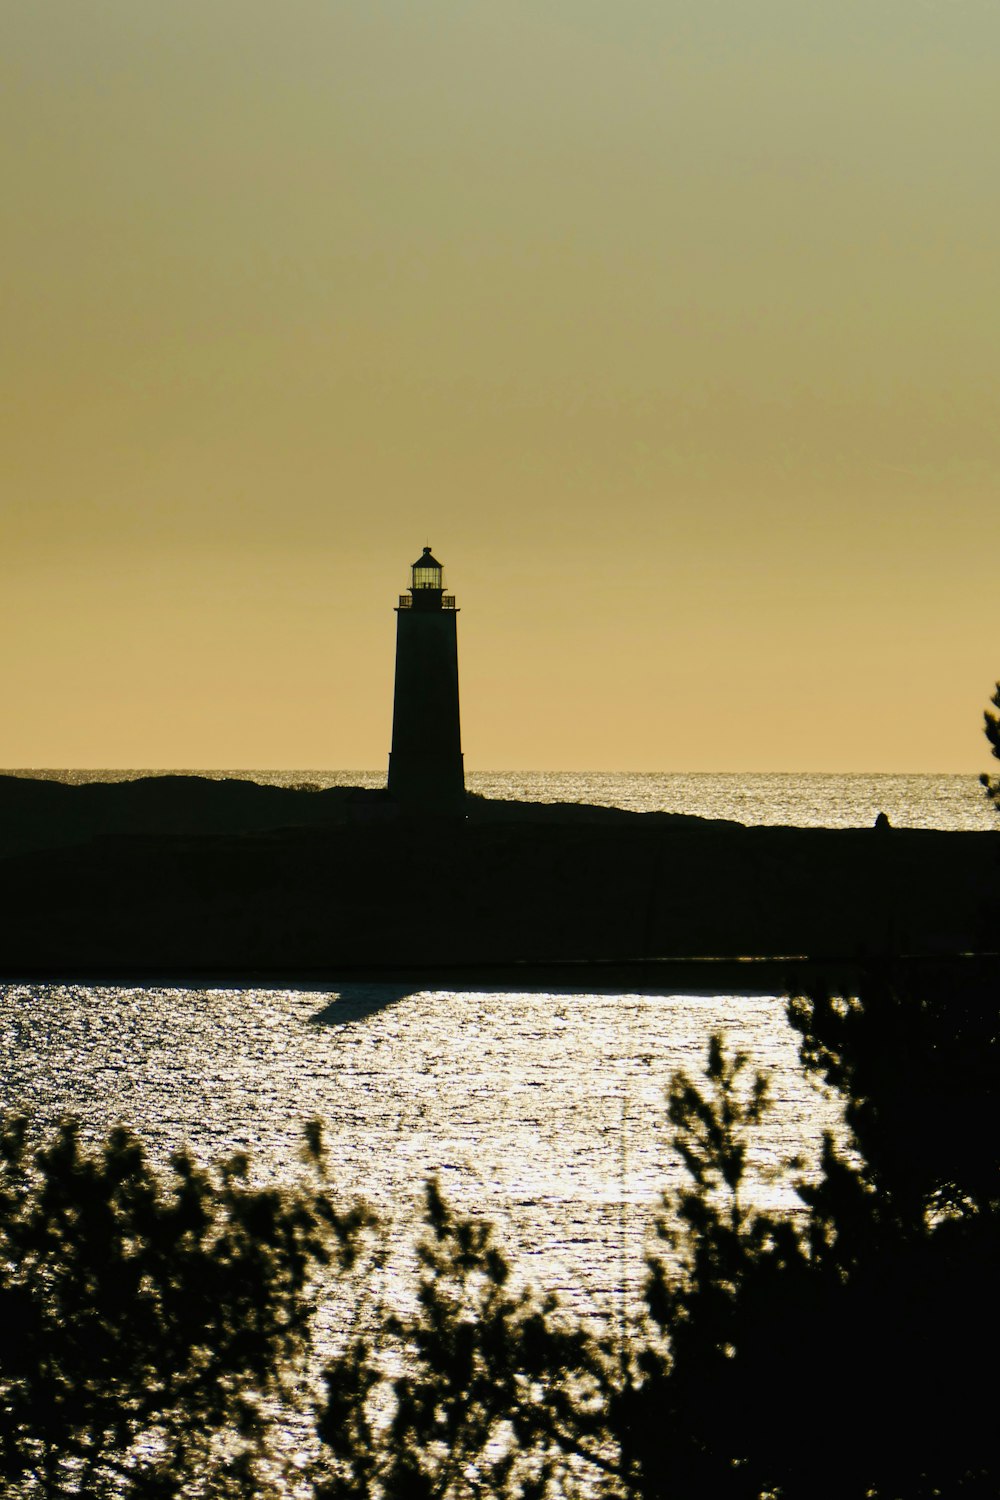 silhouette of lighthouse near body of water during sunset